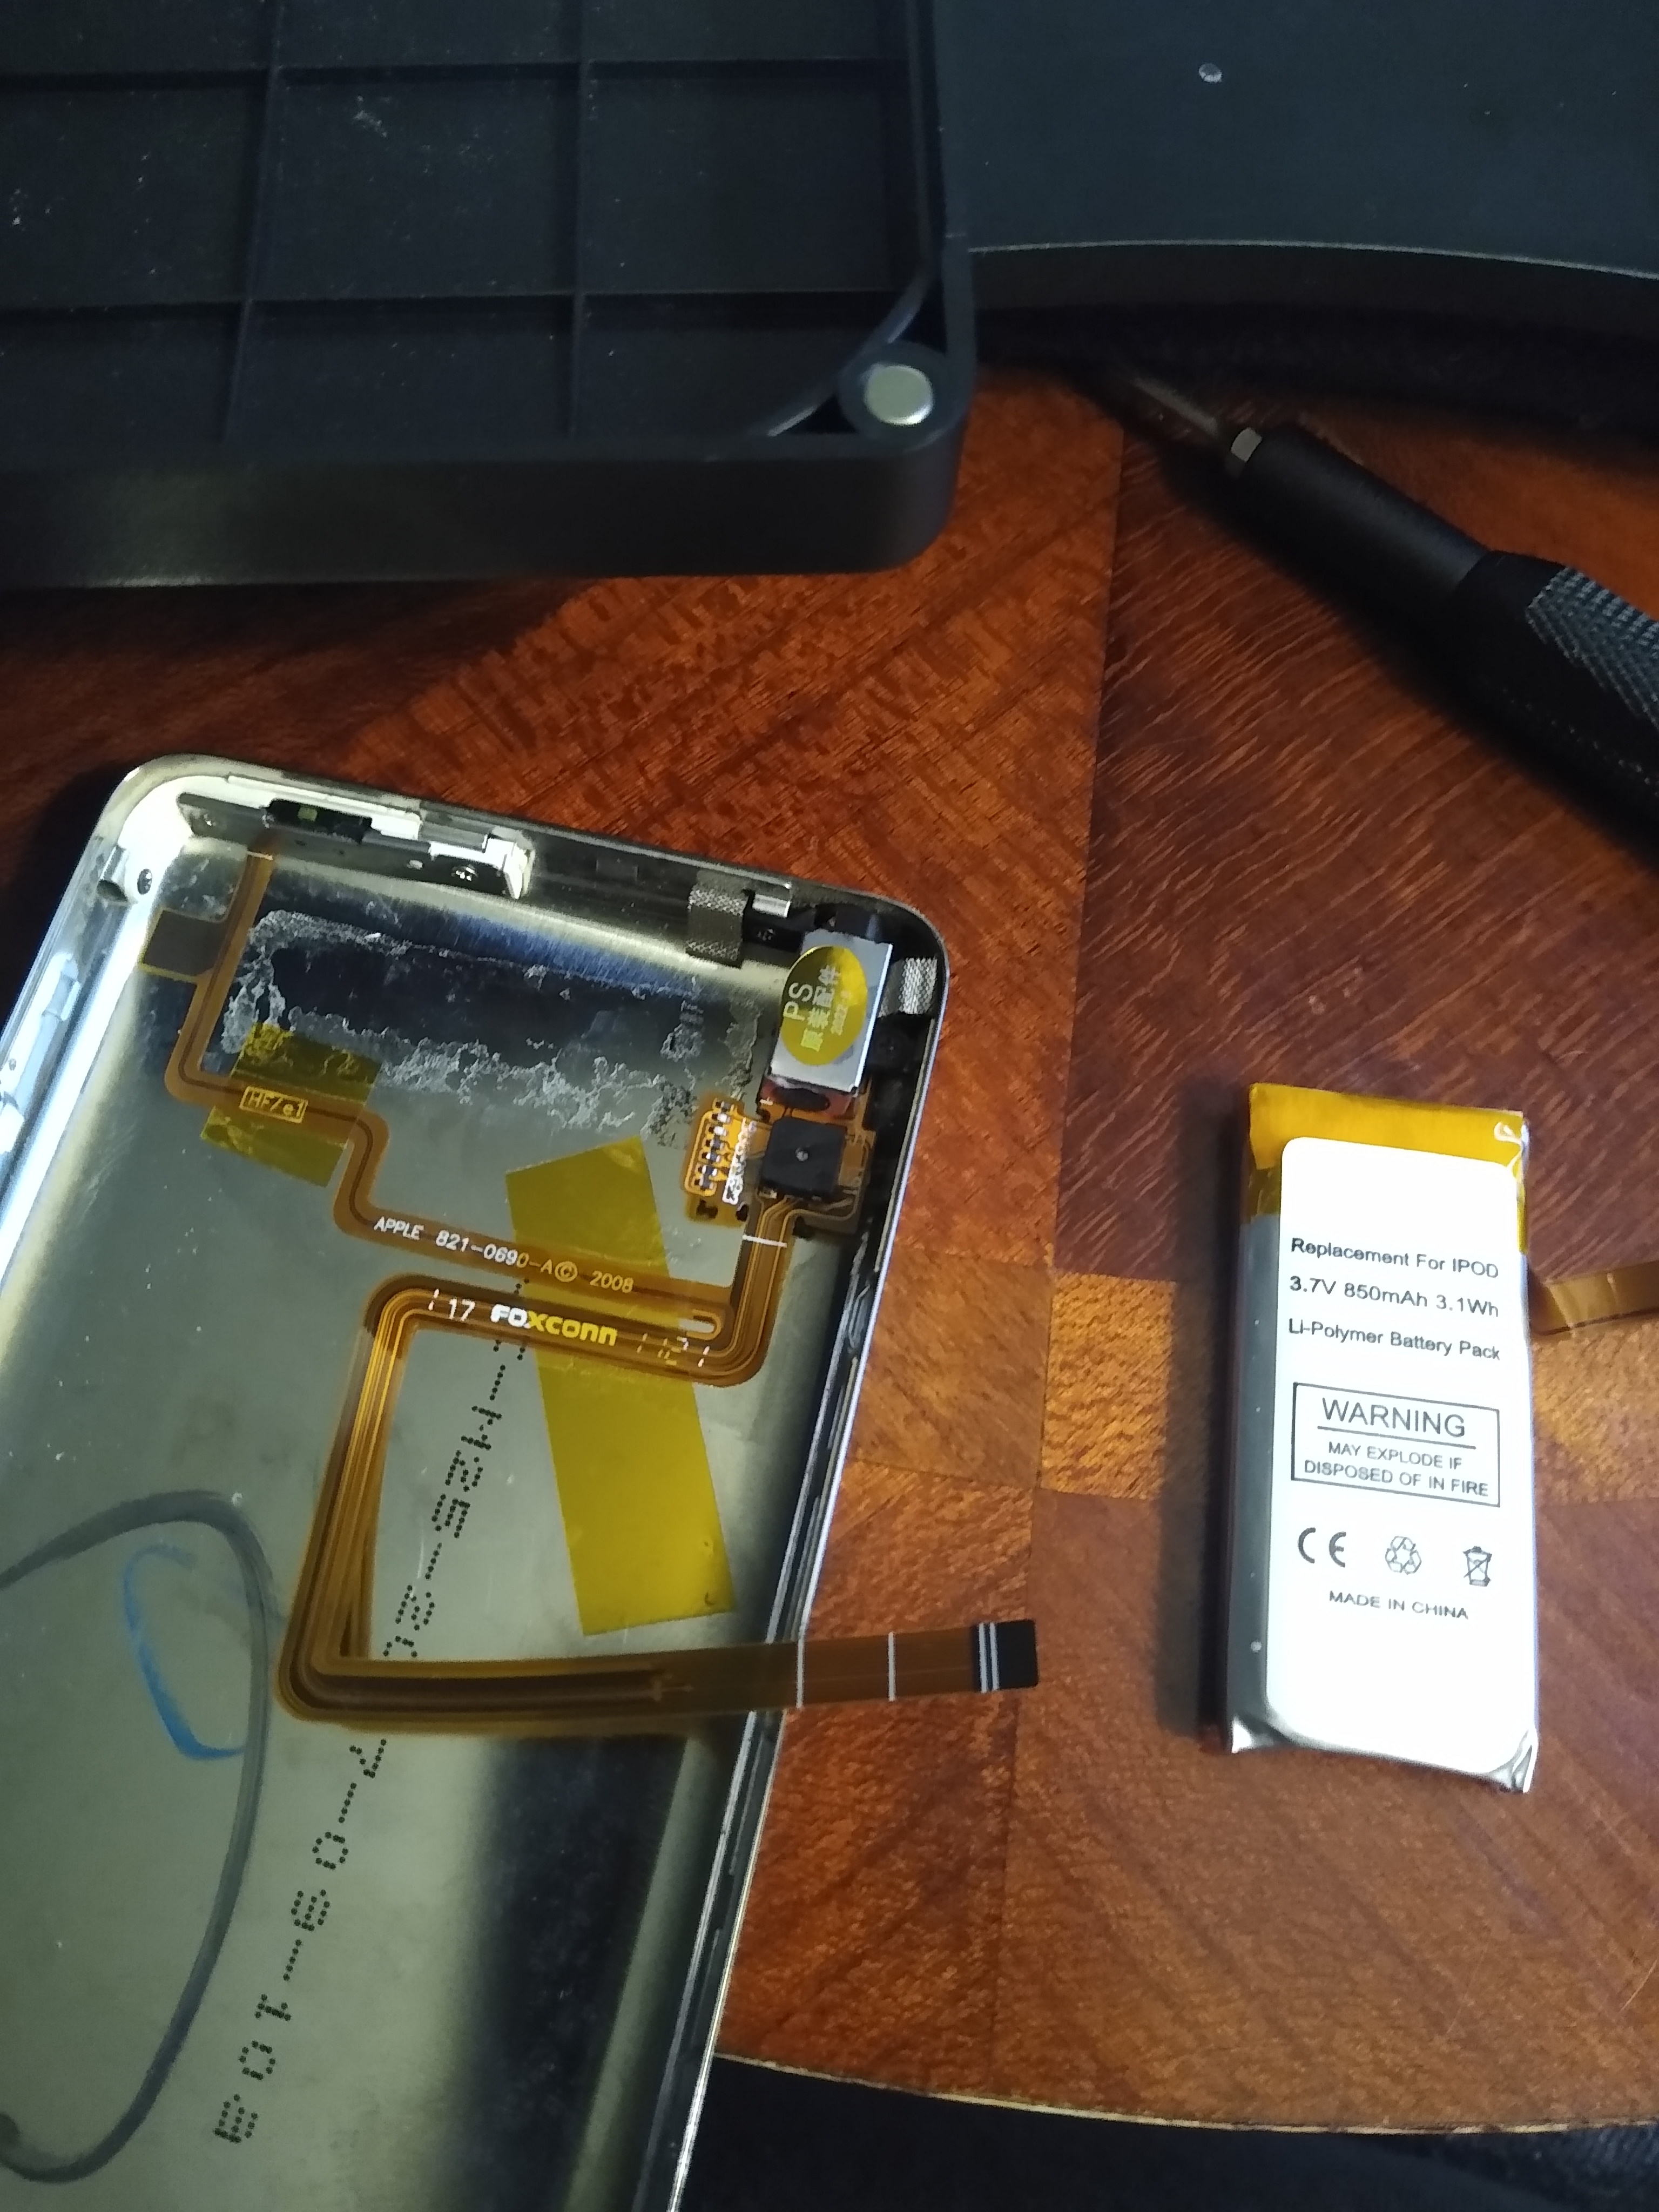 New Headphone Jack and Battery Not installed